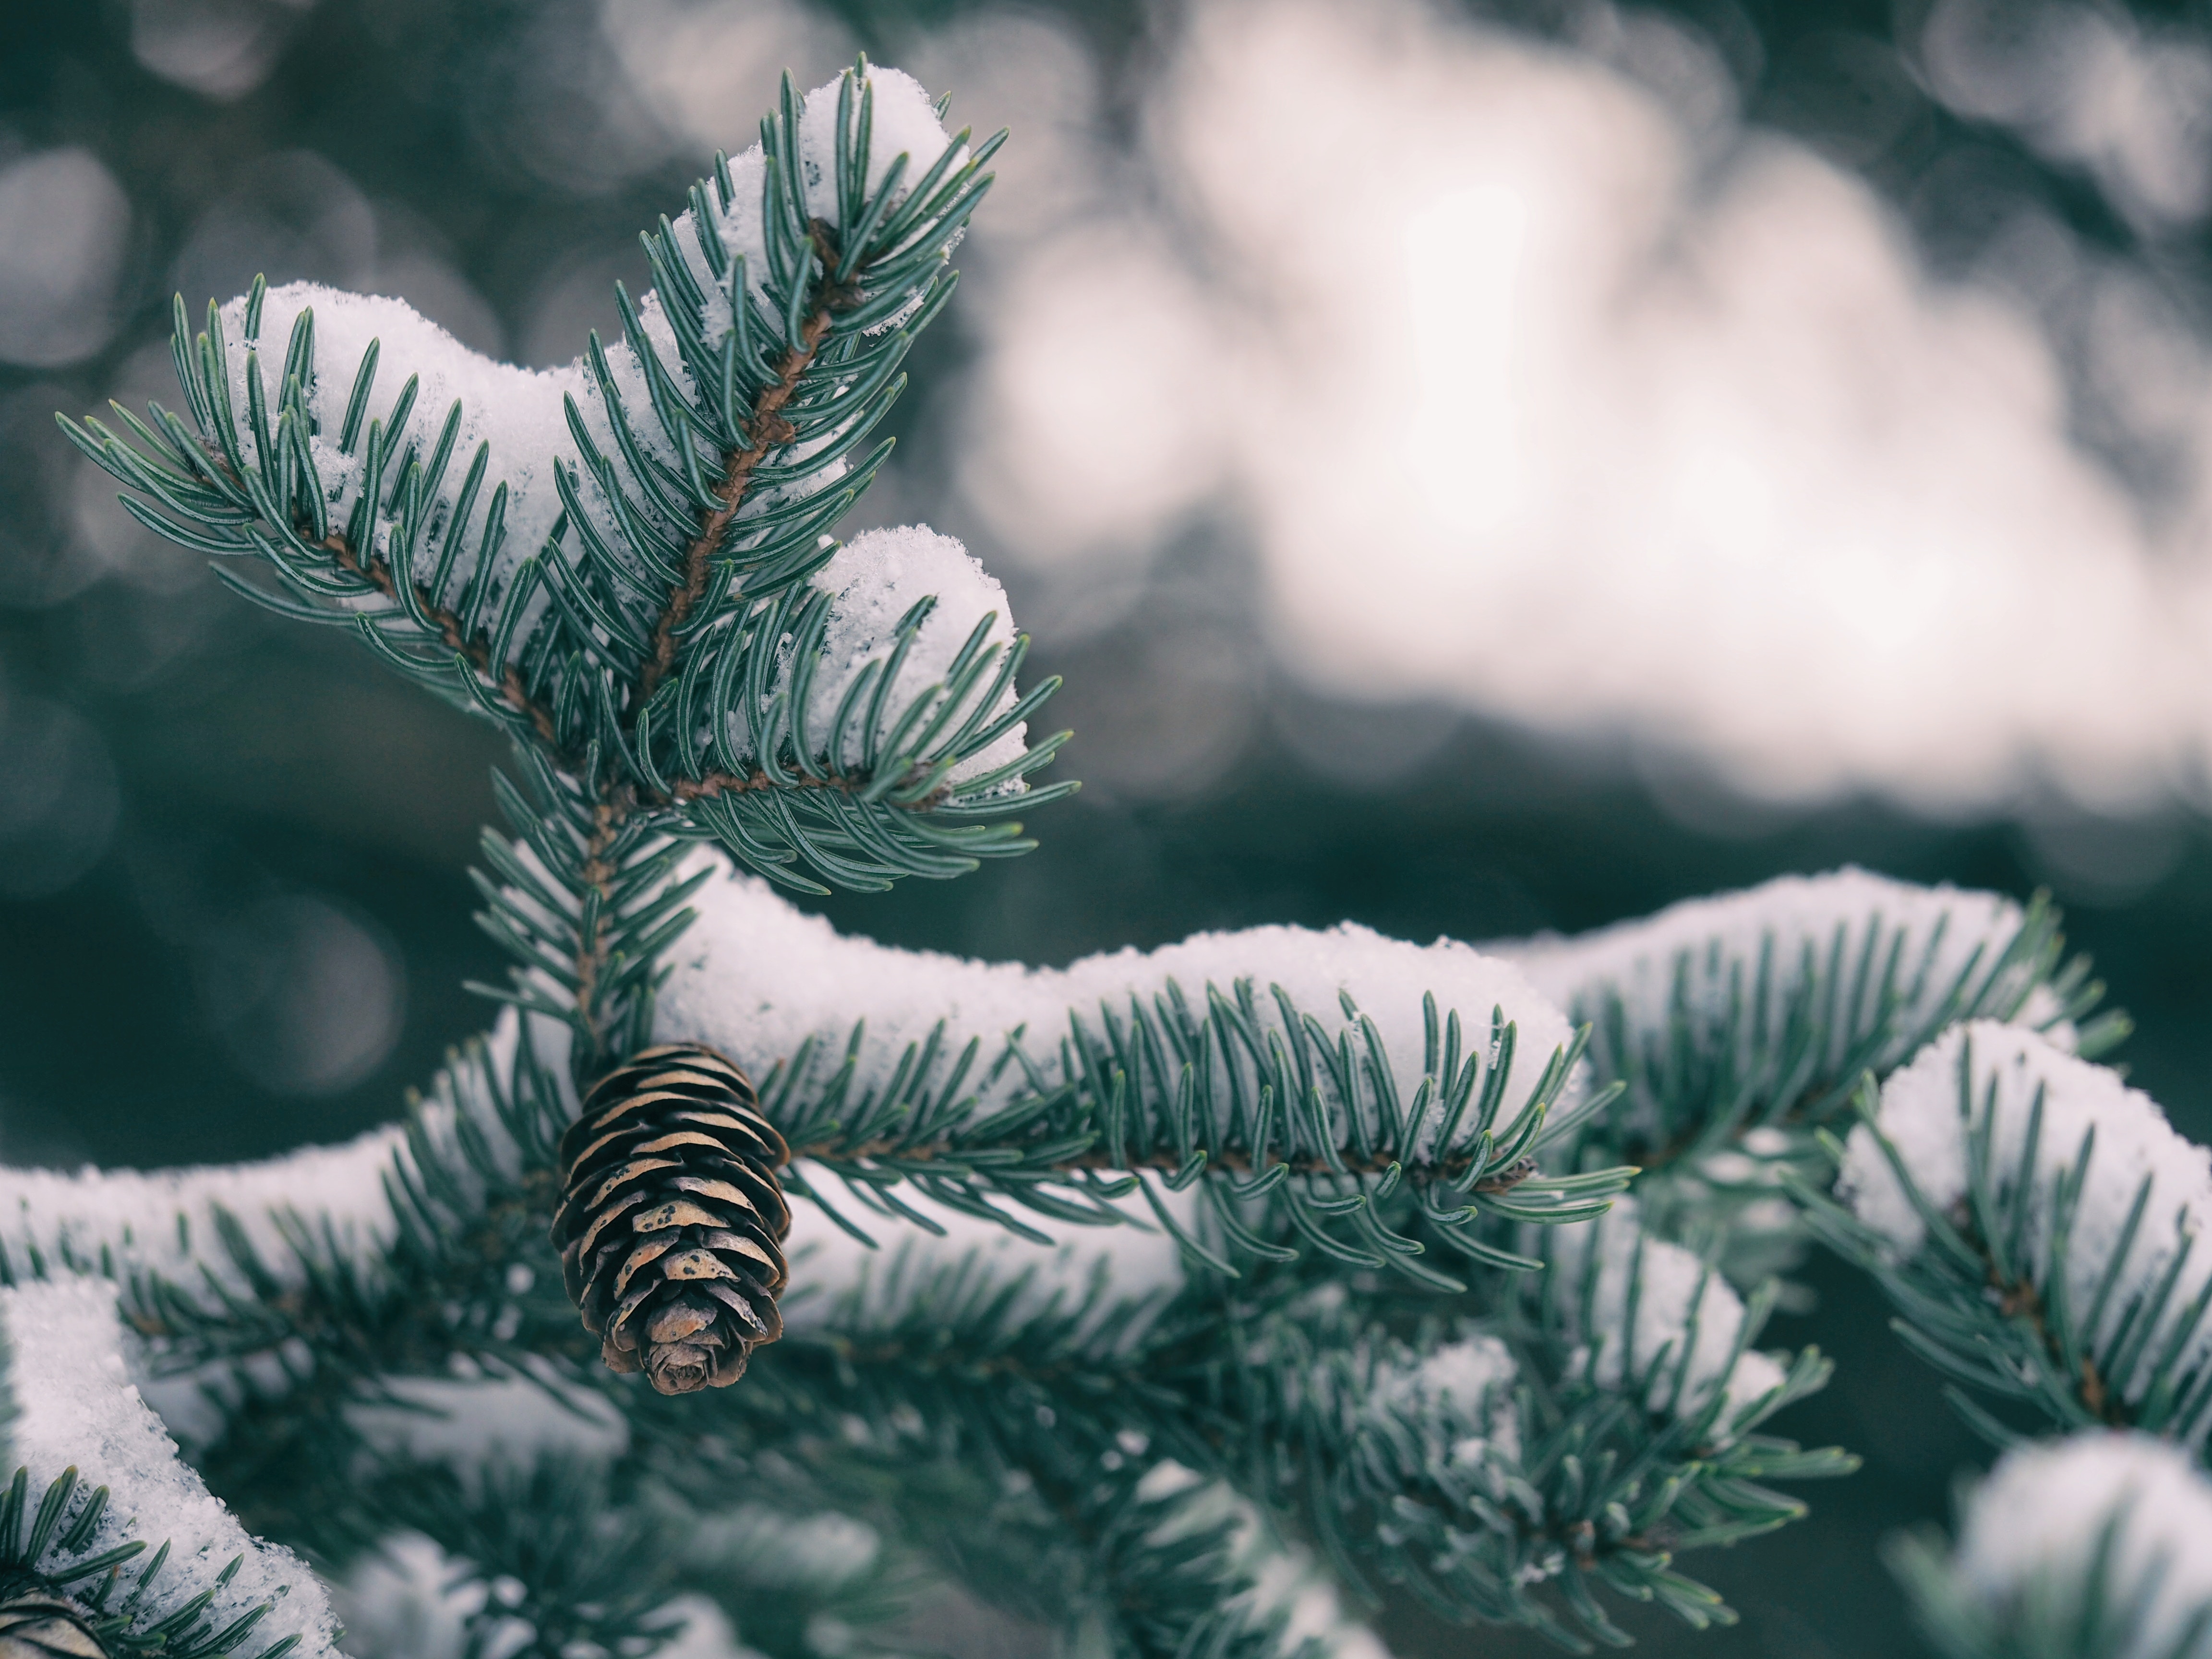 4608x3456 pine cone, winter, wildlife, pine, snow, branch, cold, green, Free image, tree, nature, evergreen Gallery HD Wallpaper